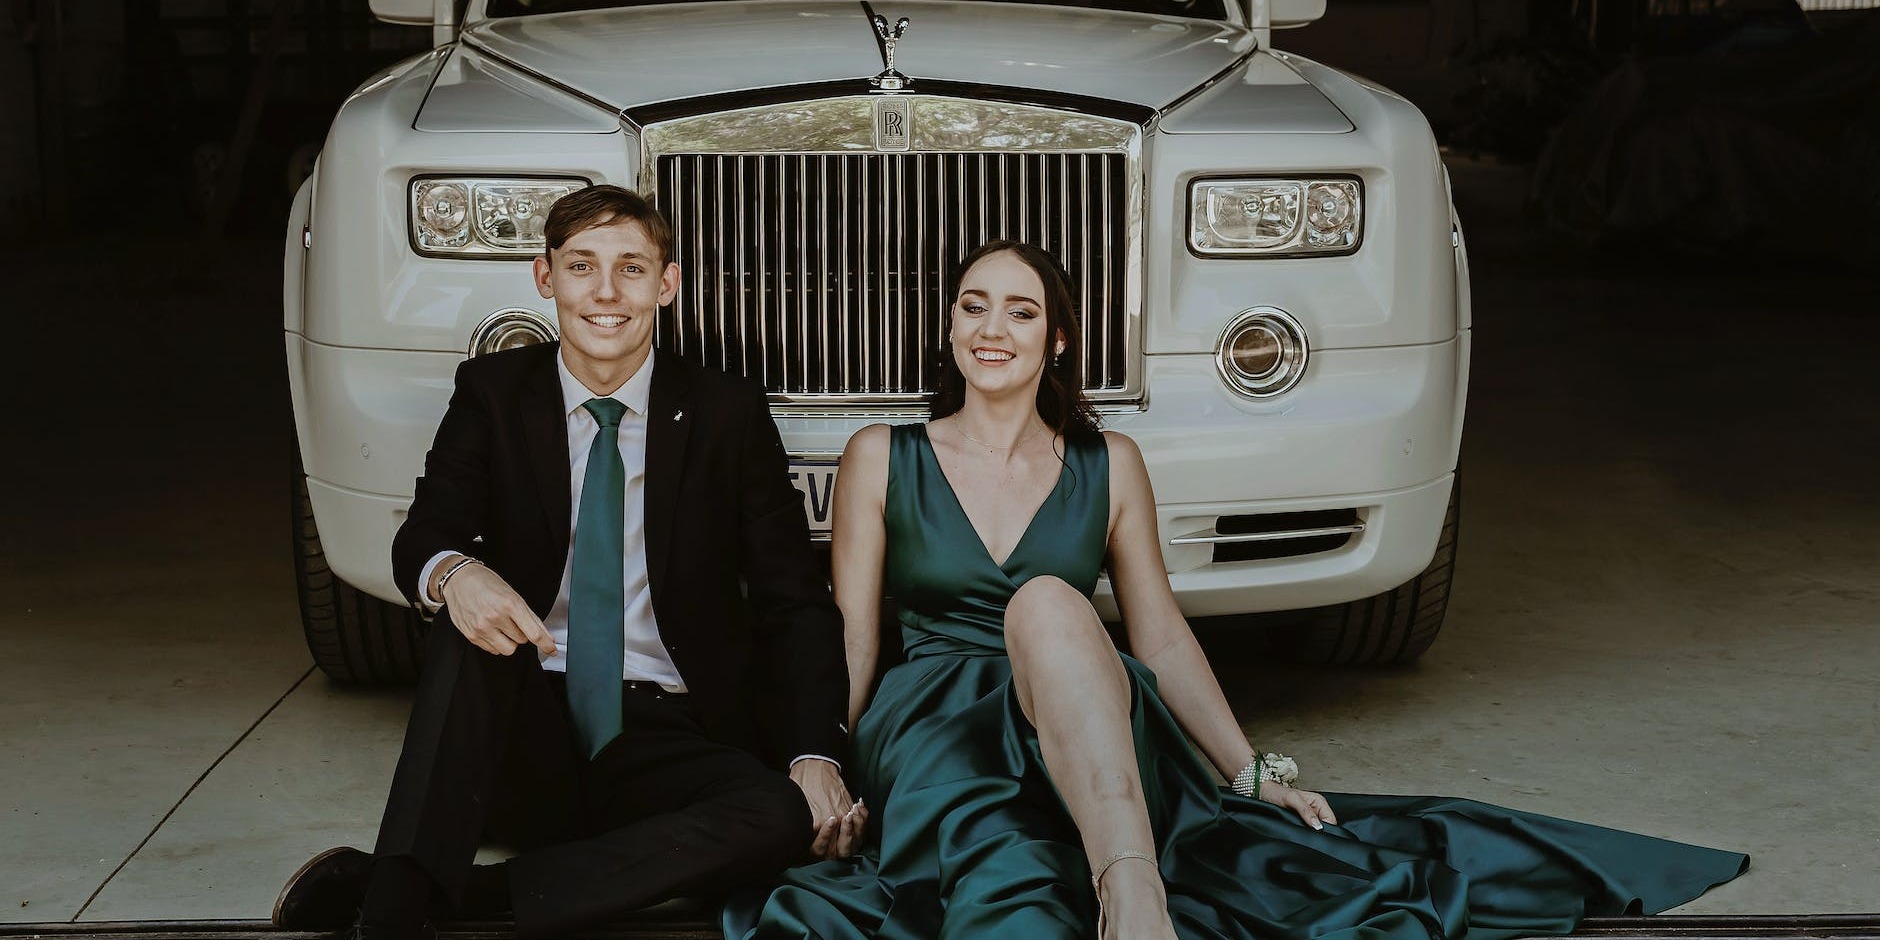 Top Tips for Booking a Prom Car in Cumbria